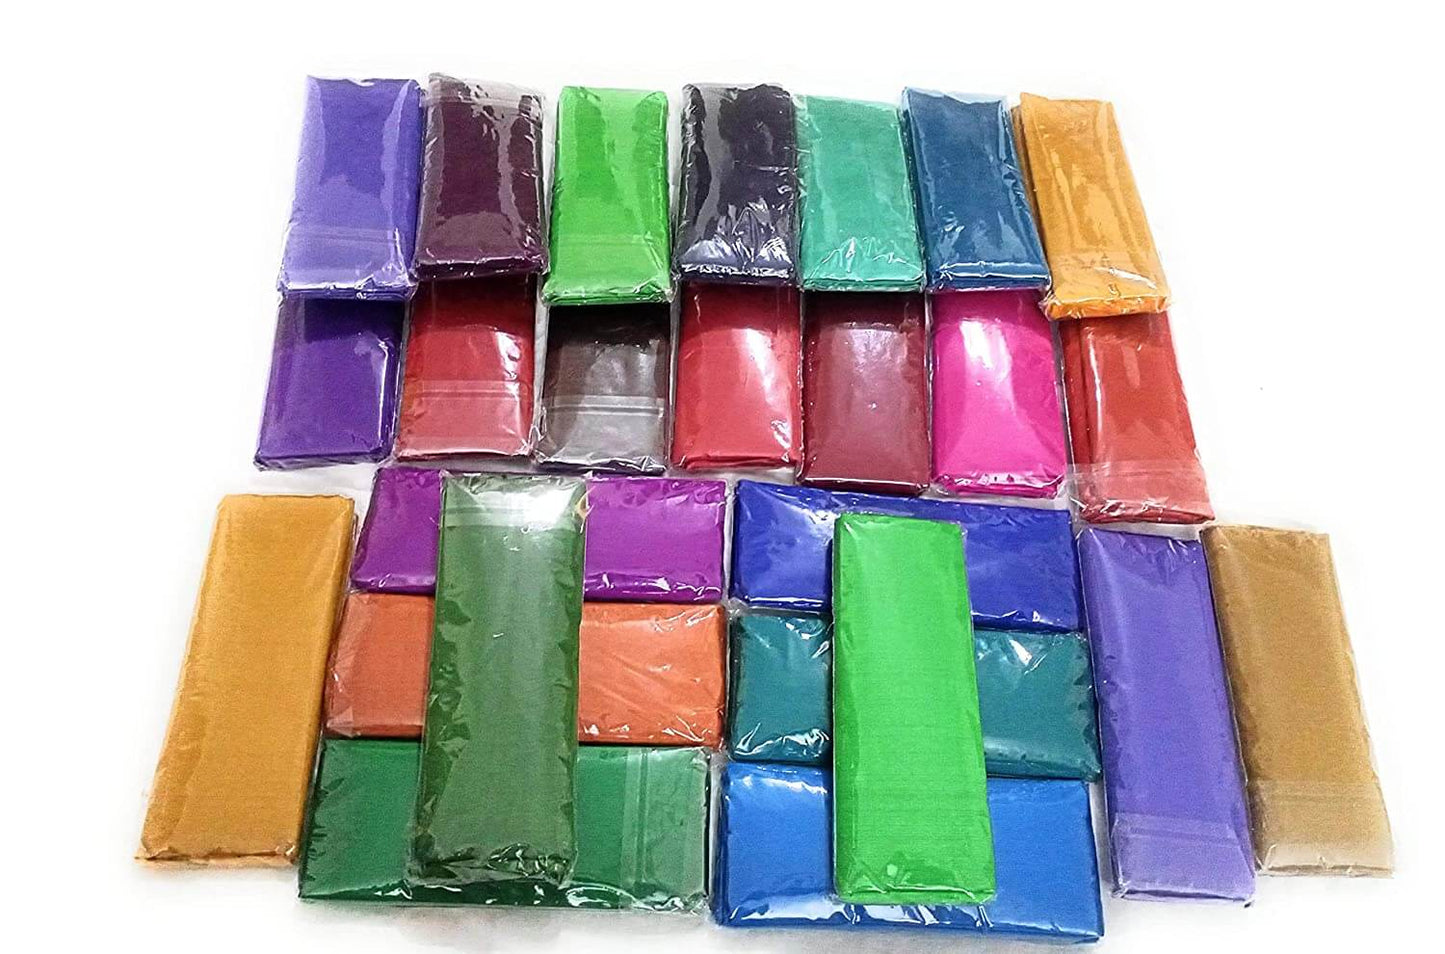 Set of 10 Pieces (1 Meter Each) - Cotton colors Silk Blouse Piece Material for Women, Unstitched for Navratri, Durga Puja, Oti Bharan, Ugadi Mangal Fashions | Indian Home Decor and Craft